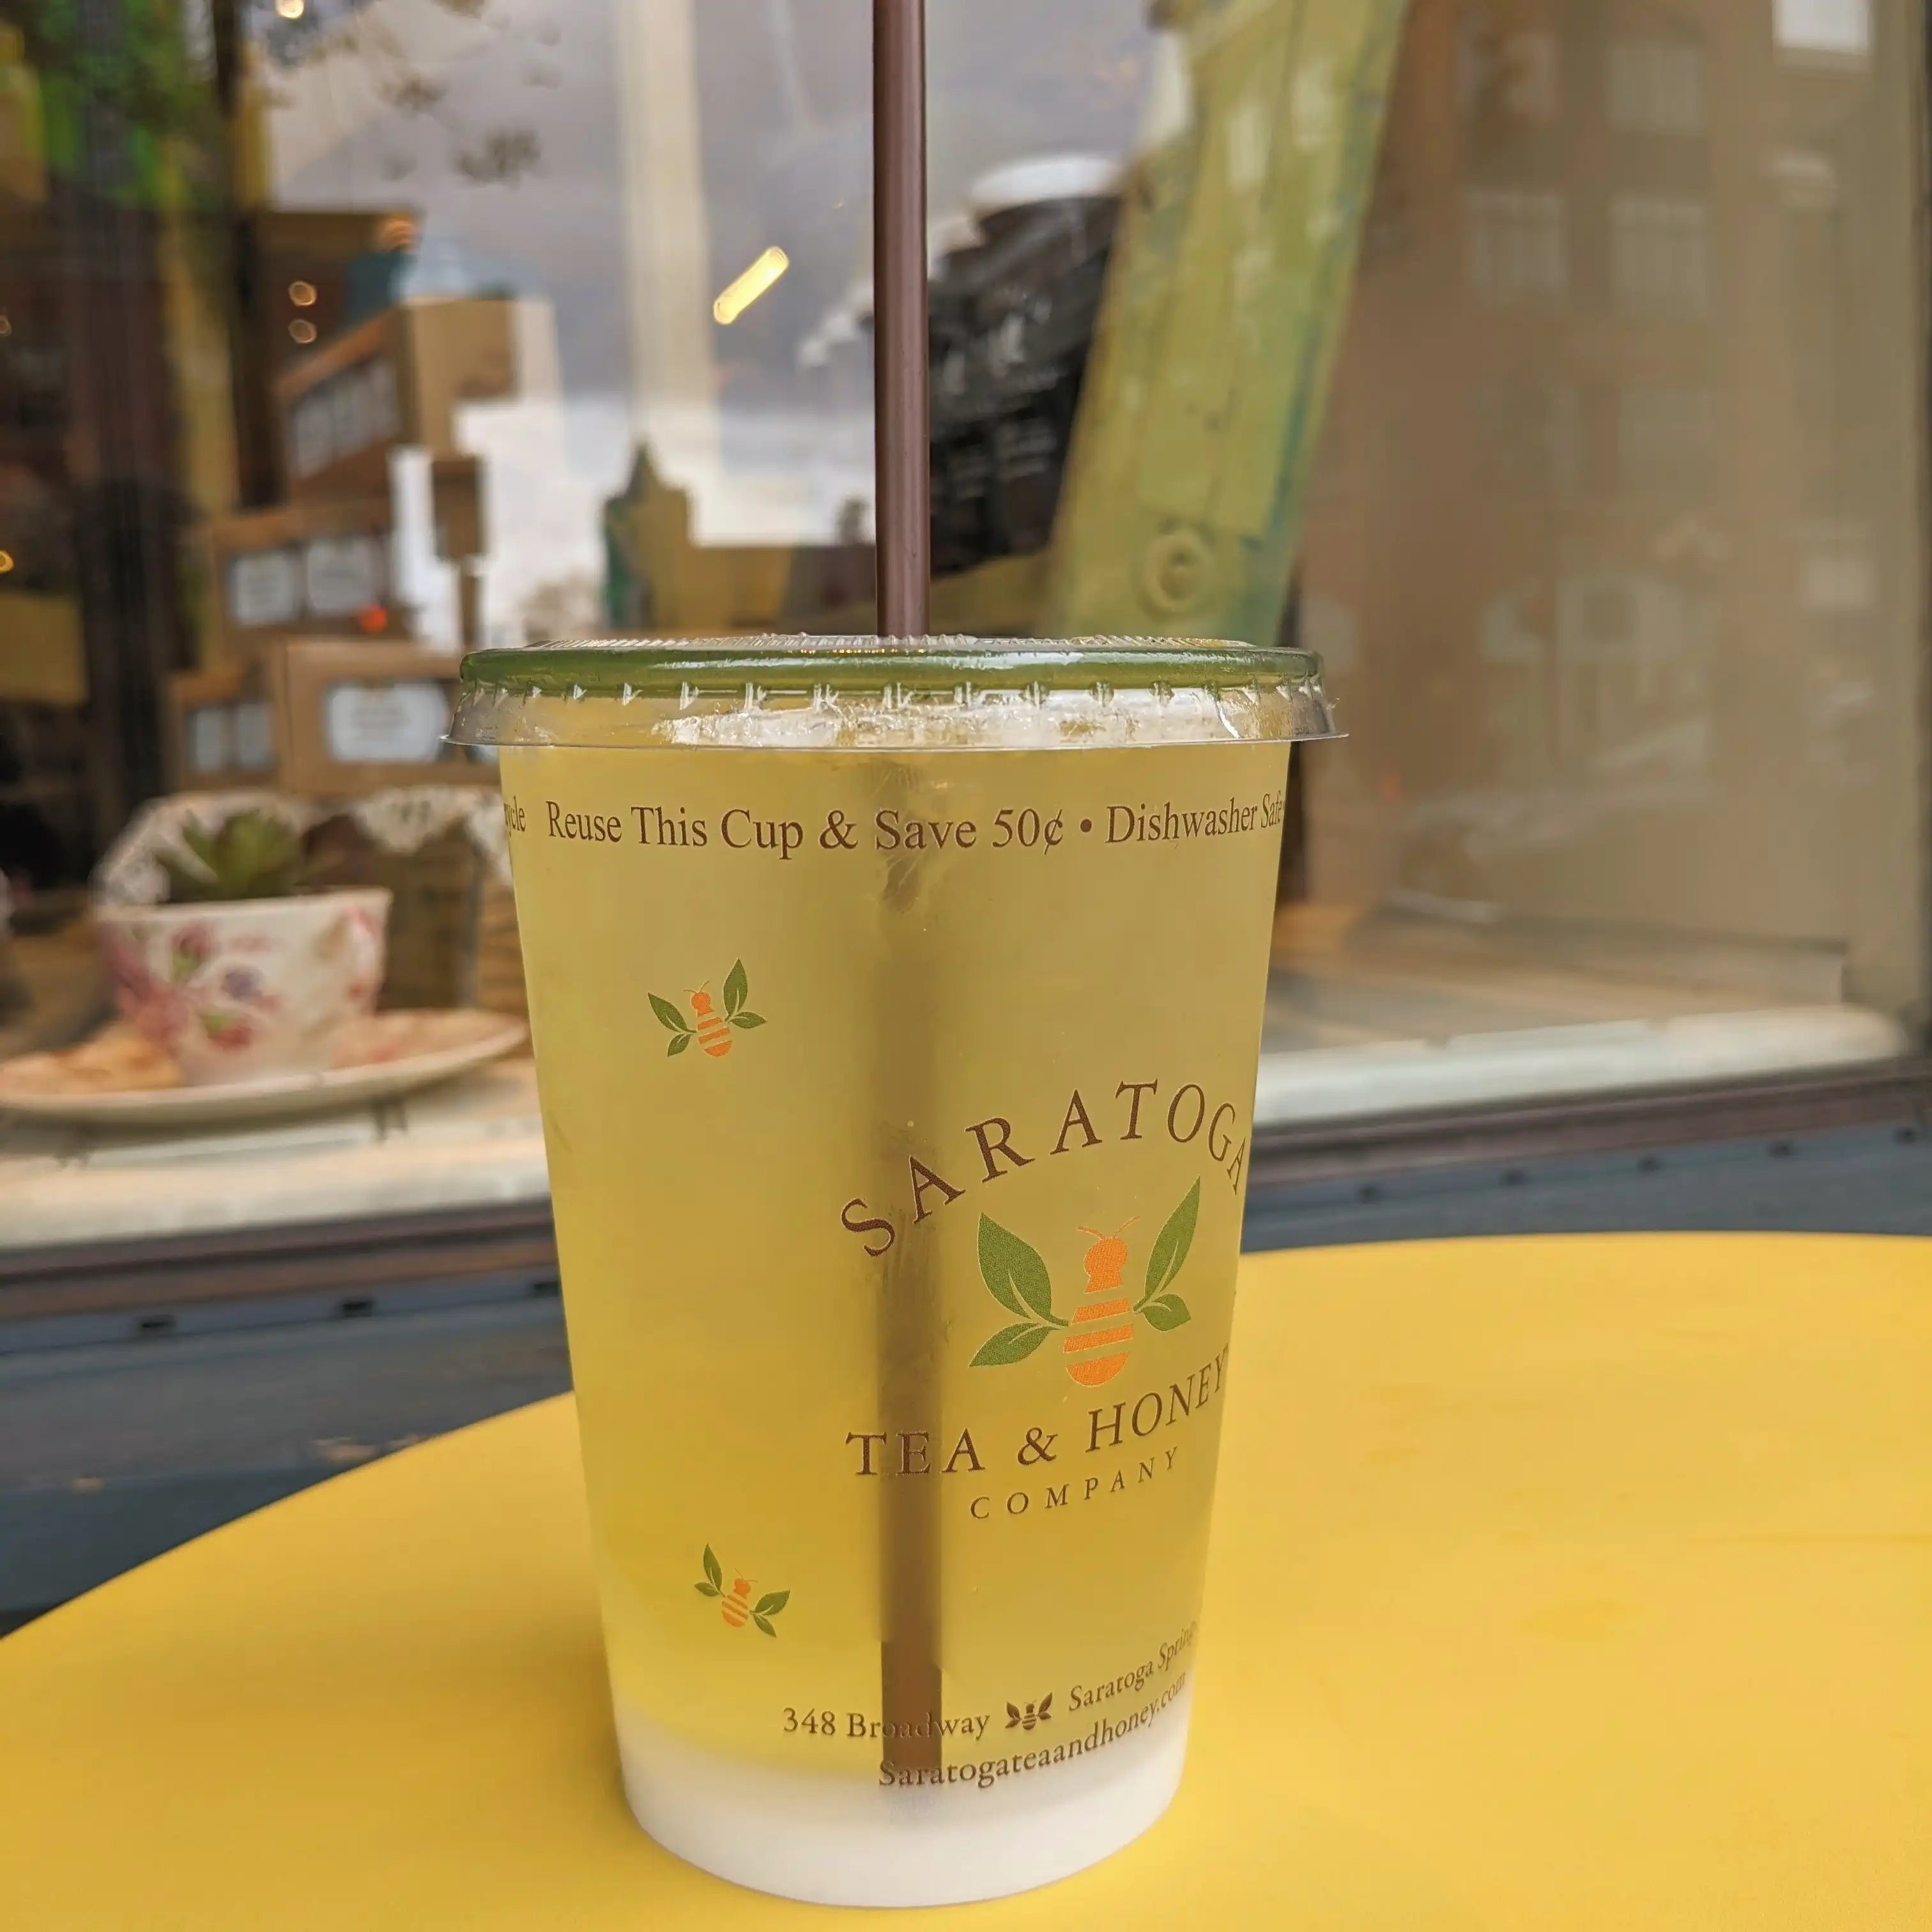 photo of reusable Saratoga Tea & Honey iced tea cup filled with green tea and a bioplastic straw